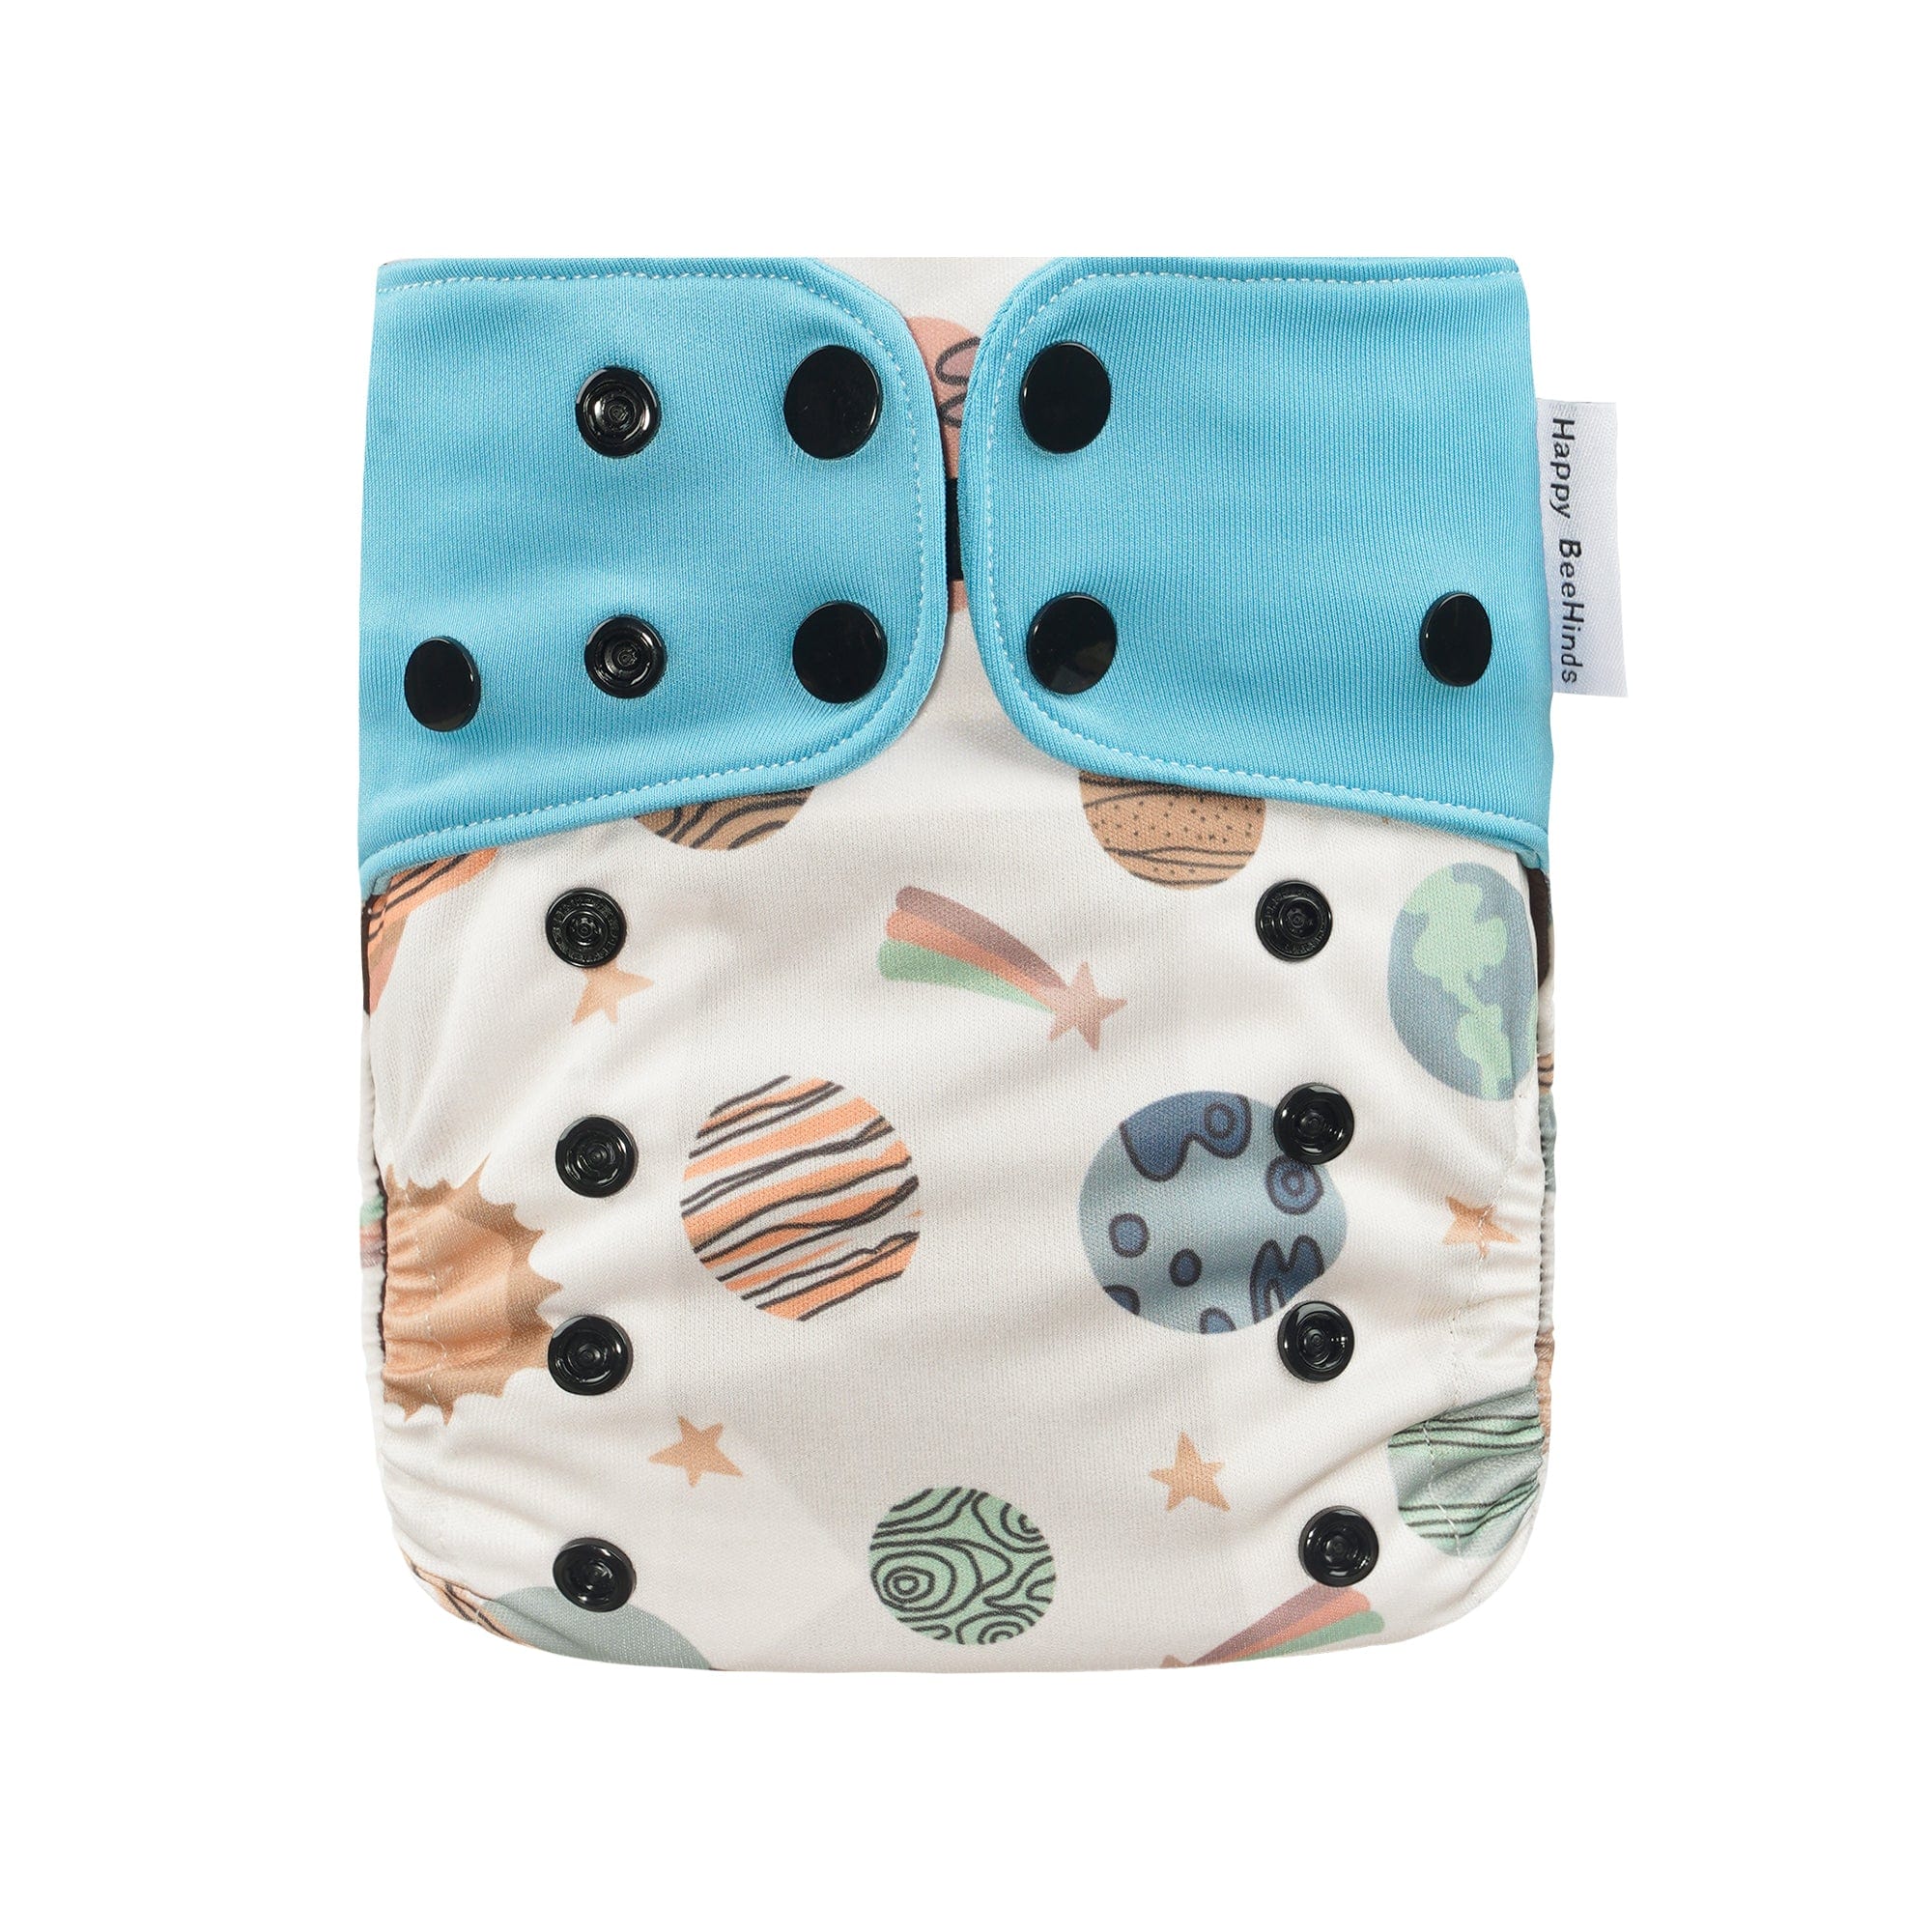 Perfect Fit Pocket Diaper By Happy Beehinds - Prints